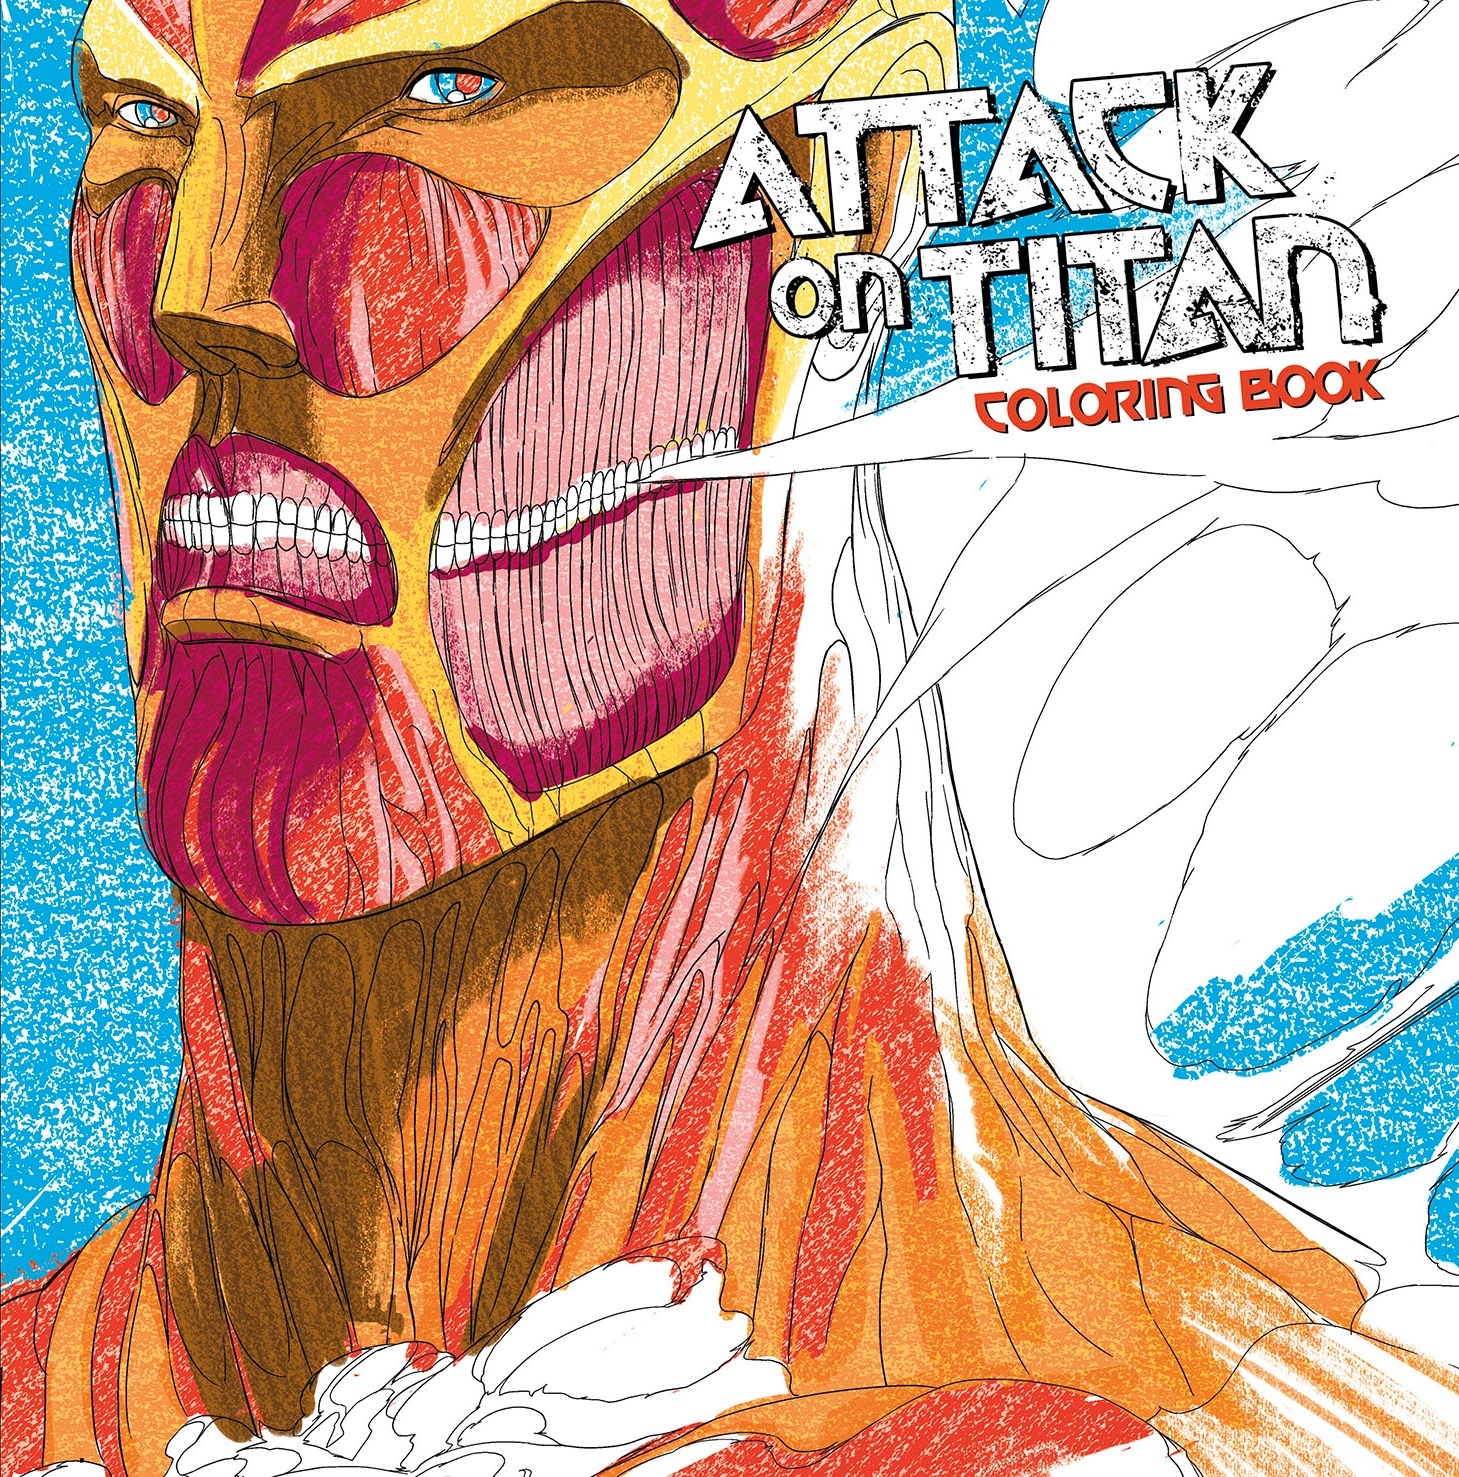 Attack on Titan Coloring Book by HAJIME ISAYAMA - Penguin Books New Zealand